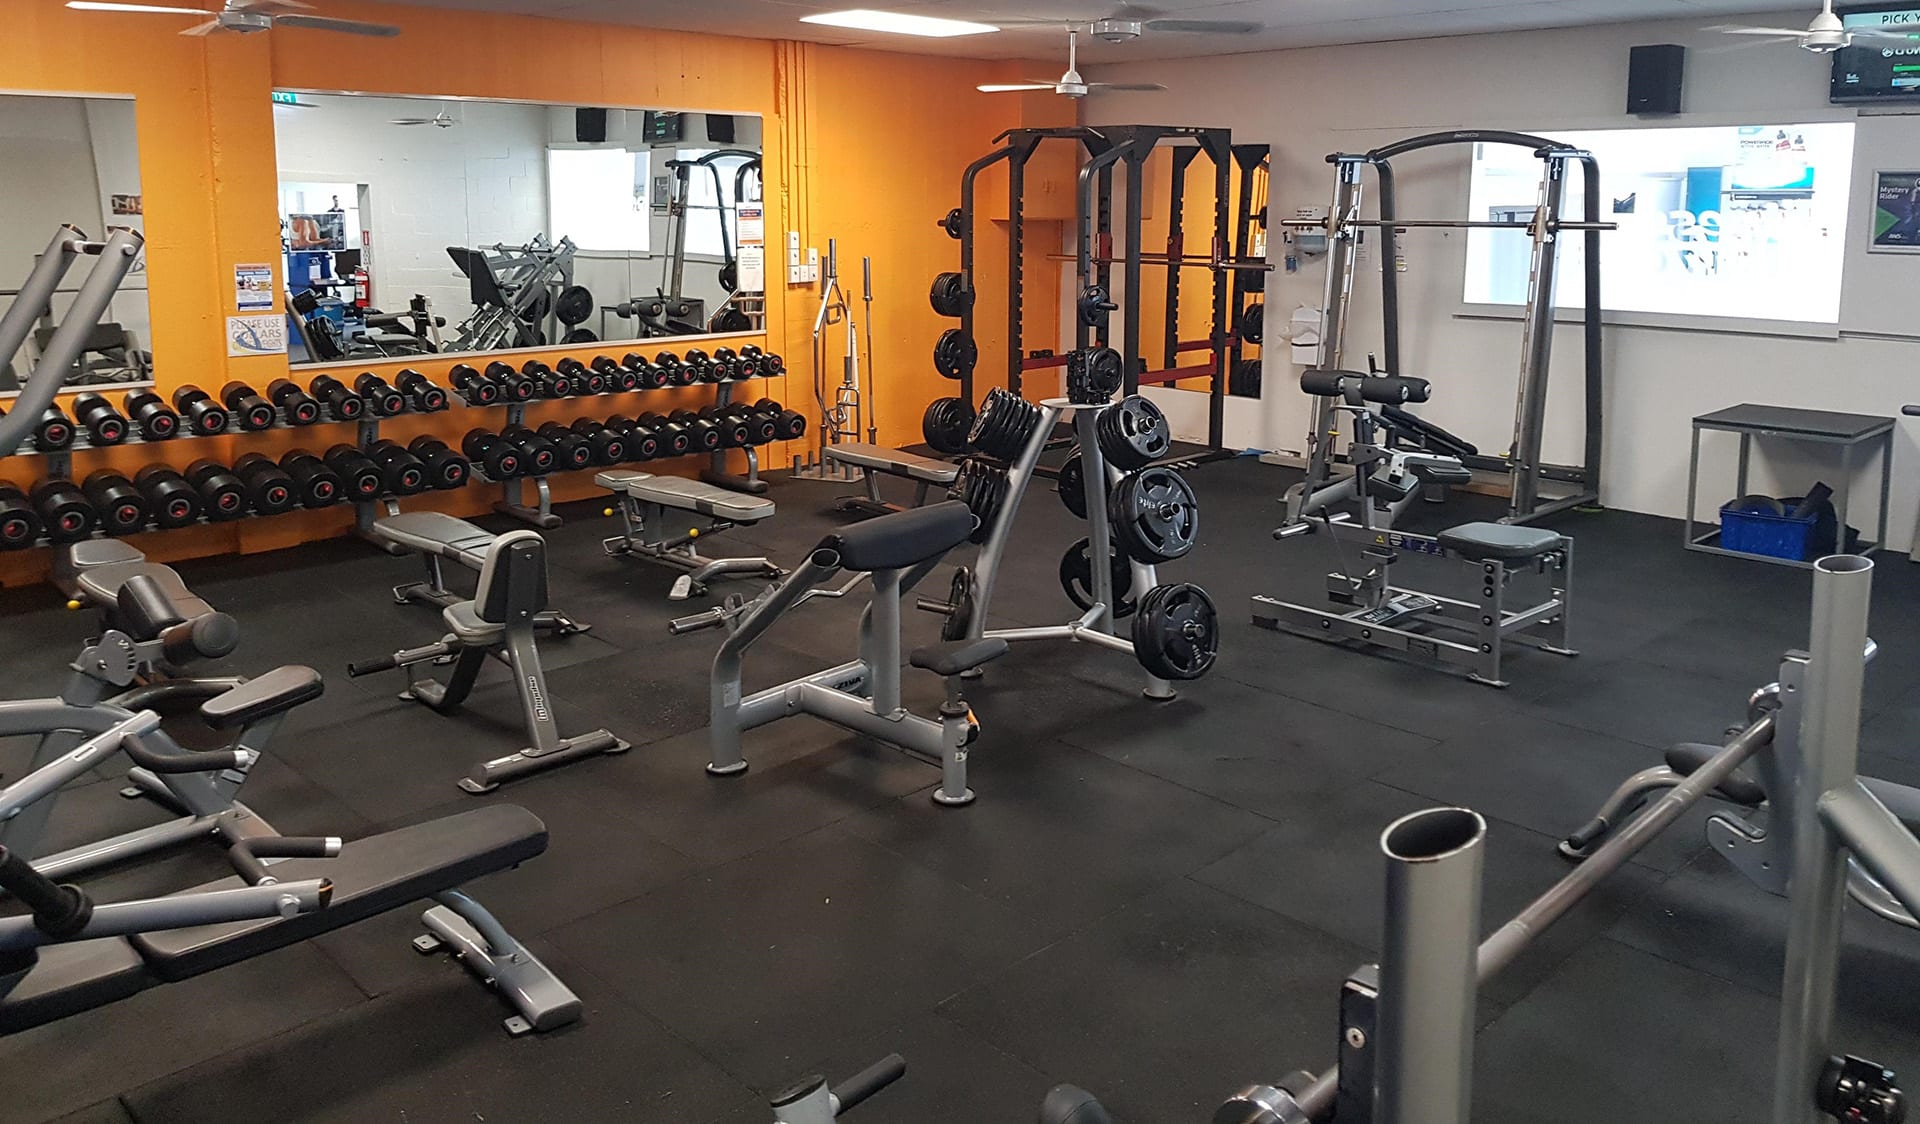 Advance Fitness 24/7 Gym Invercargill Weights Room